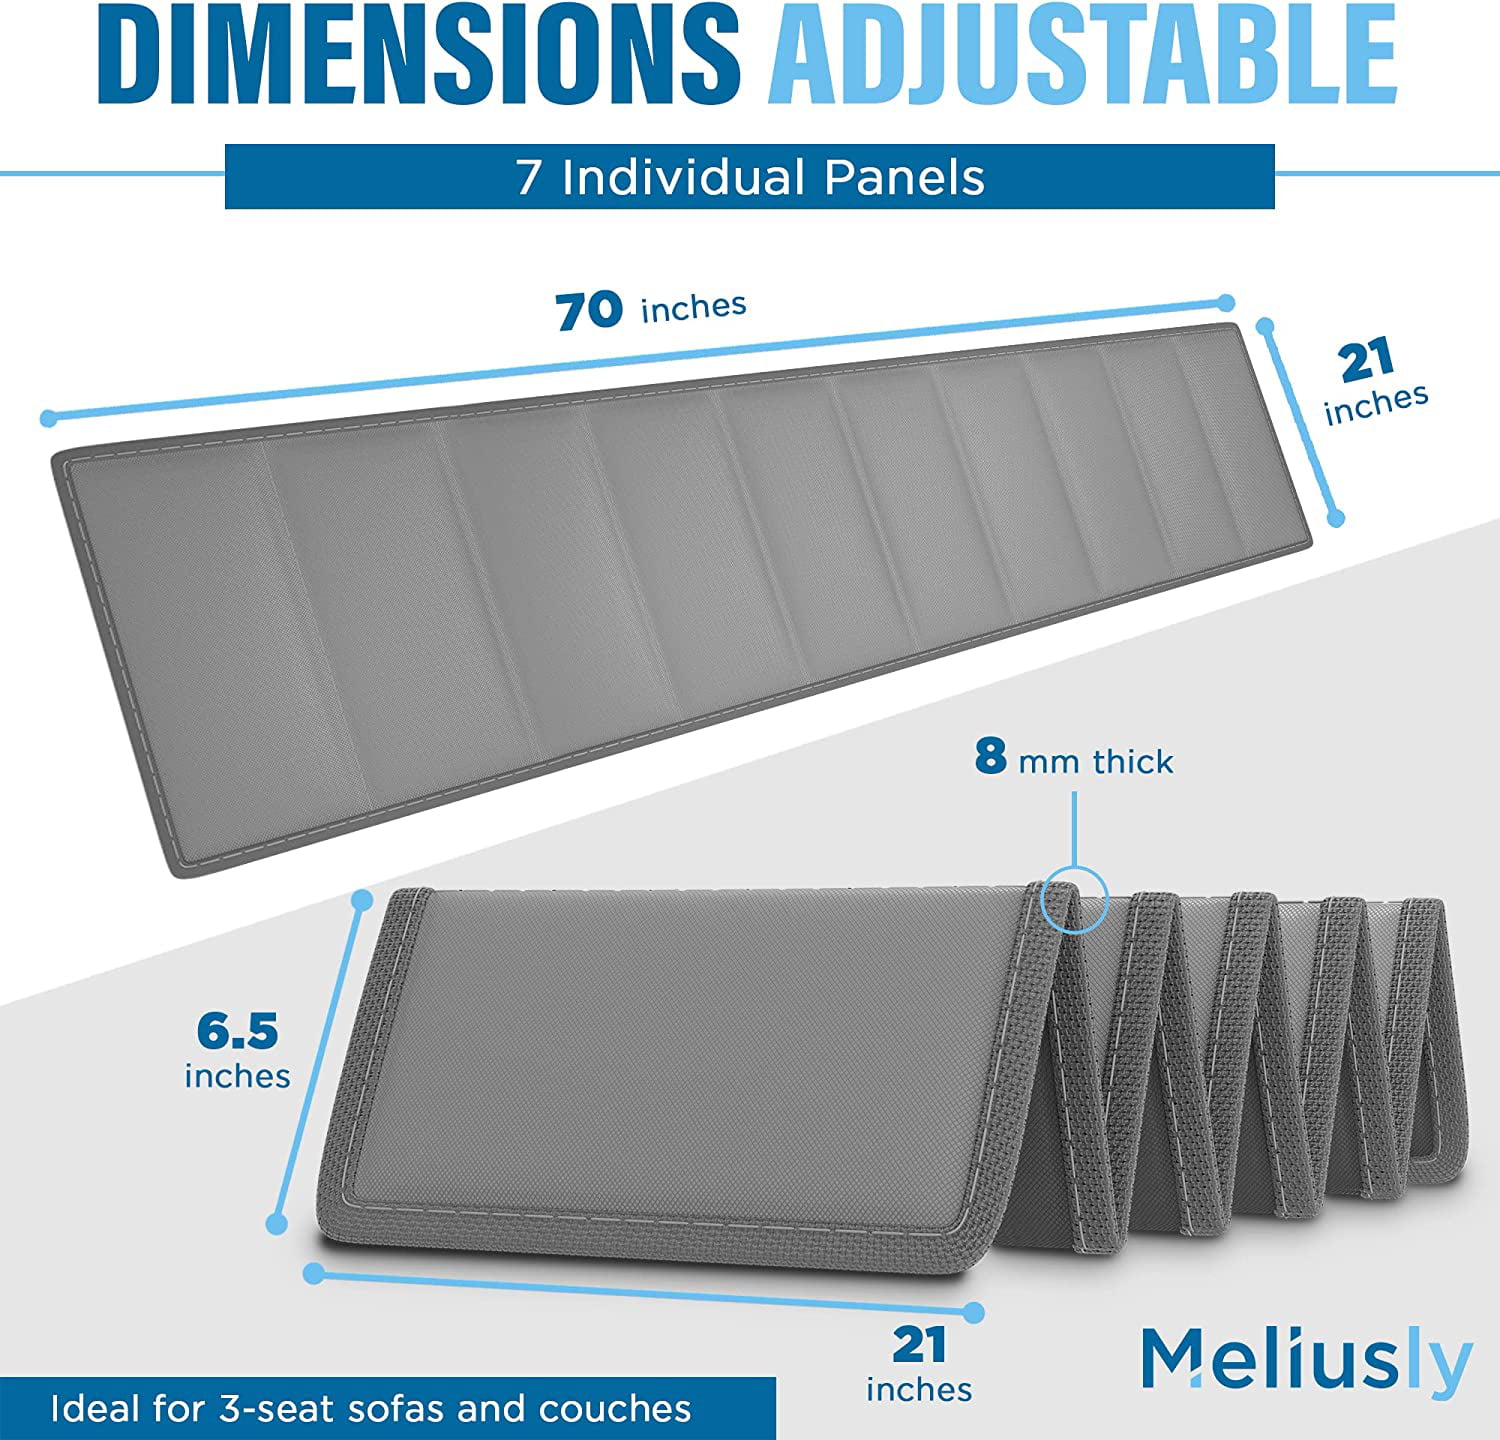 Meliusly® Sofa Cushion Support Board (17x79) - Couch Supports for Sagging  Cushions, Couch Saver for Saggy Couches, Under Couch Cushion Support for  Sagging Seat,…